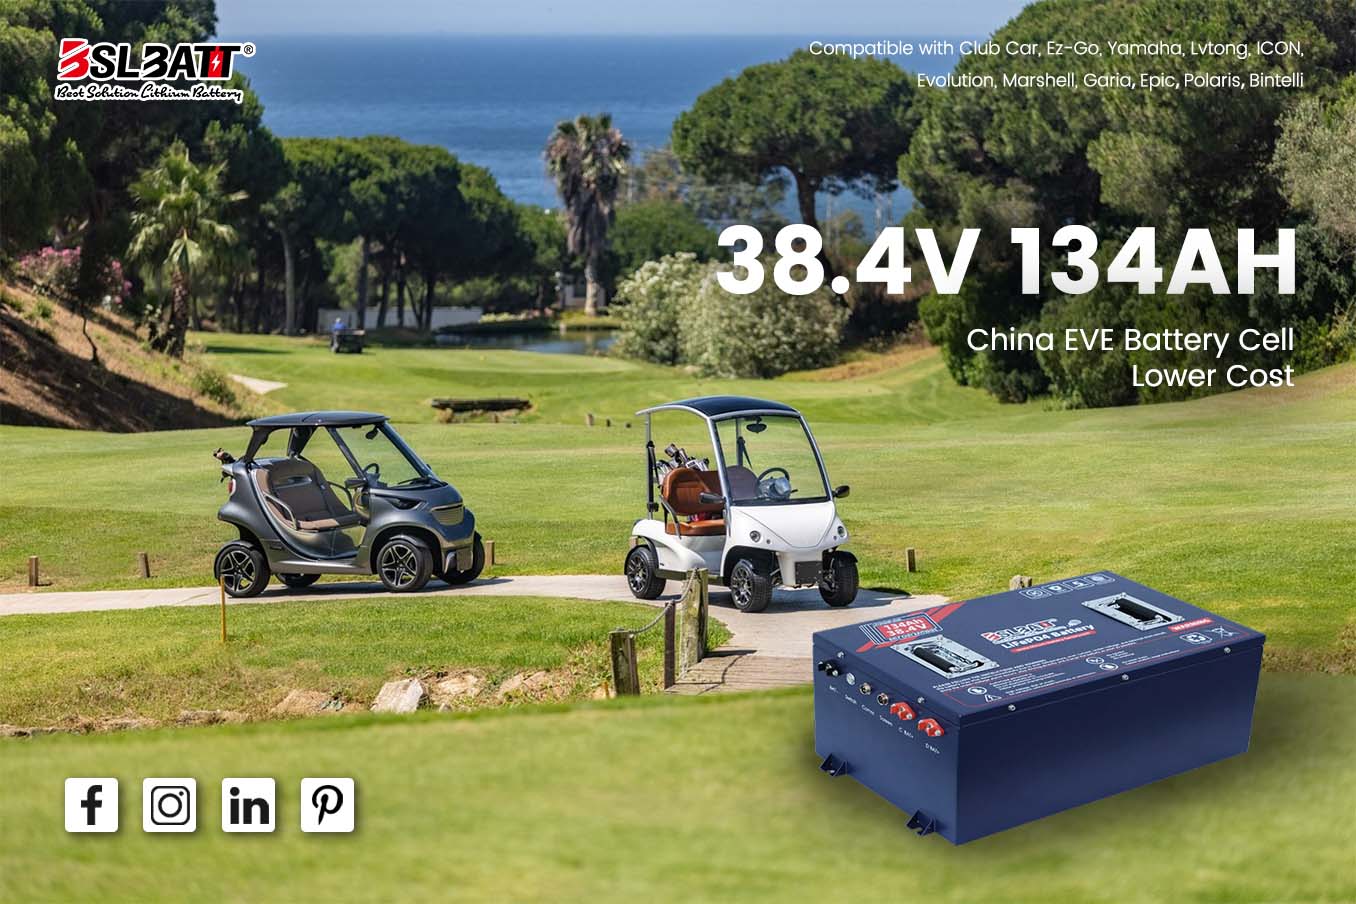 Quick Guide to Yamaha Golf Cart Models and Years